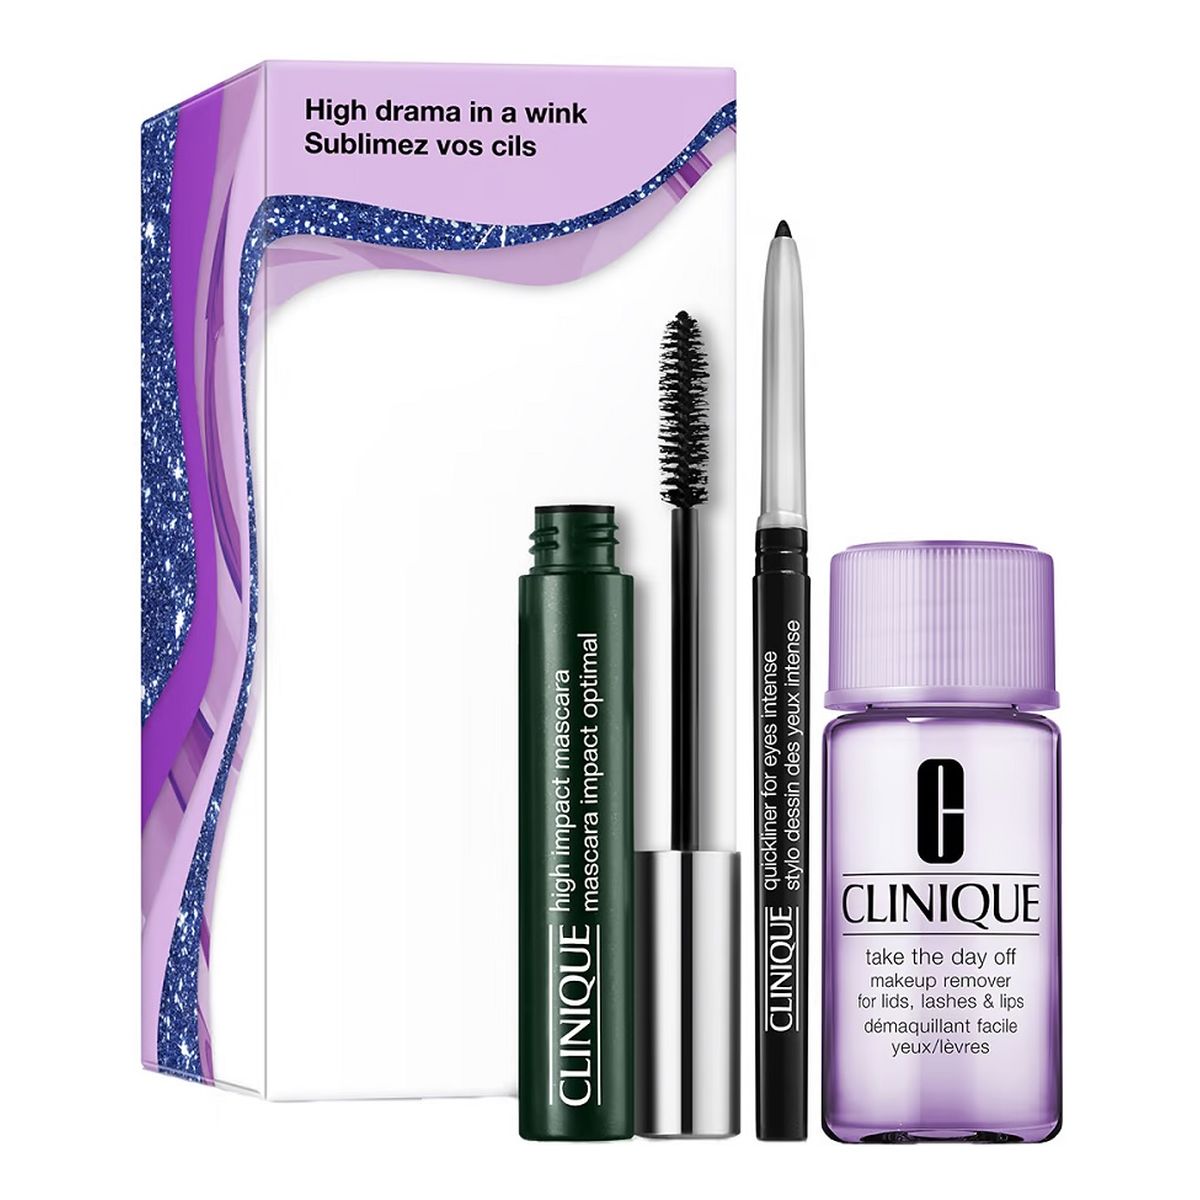 Clinique Zestaw High Drama In A Wink High Impact Mascara Black 7ml + Quickliner For Eyes Intense + Makeup Remover